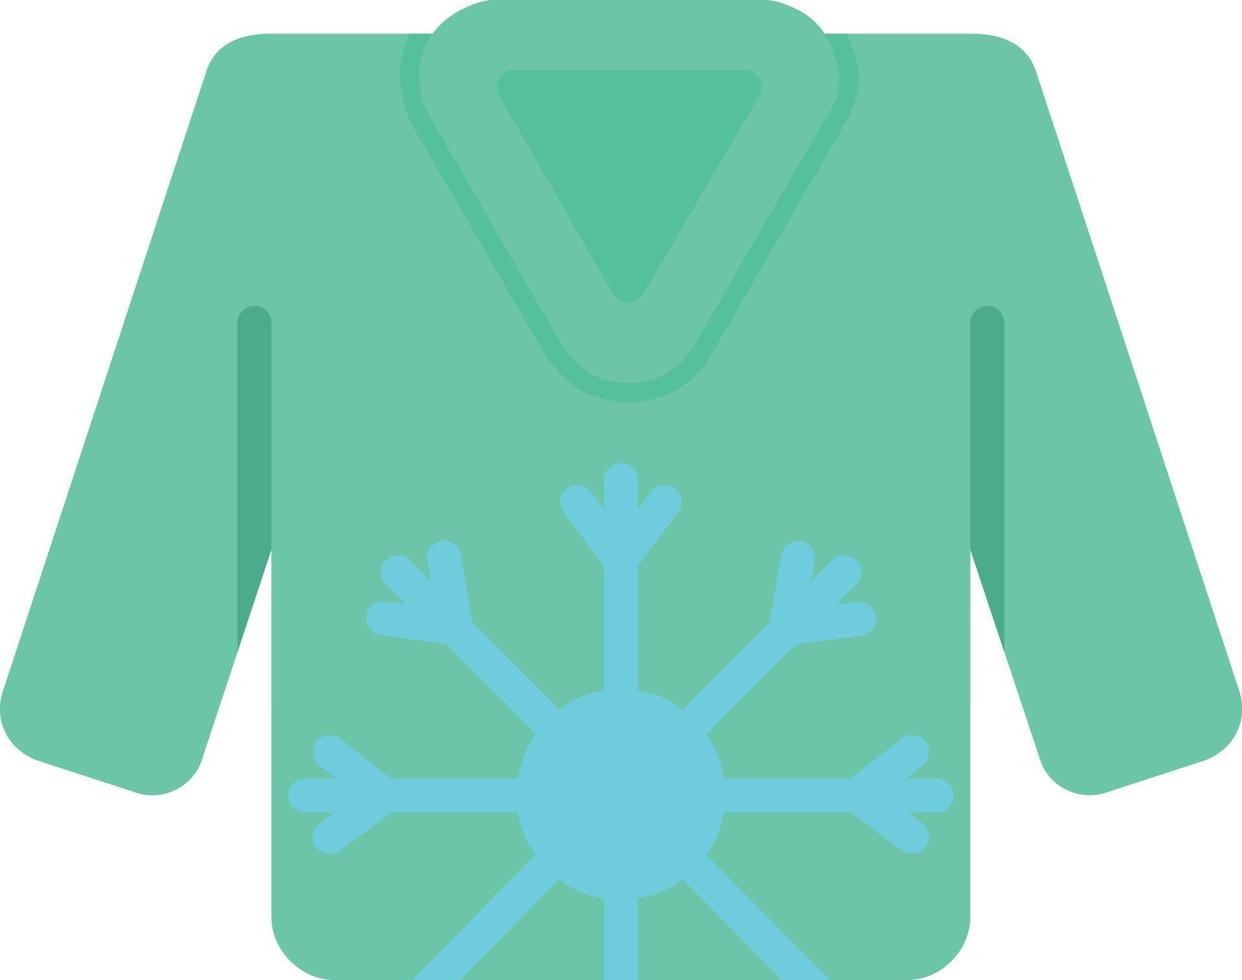 Sweater Flat Icon vector